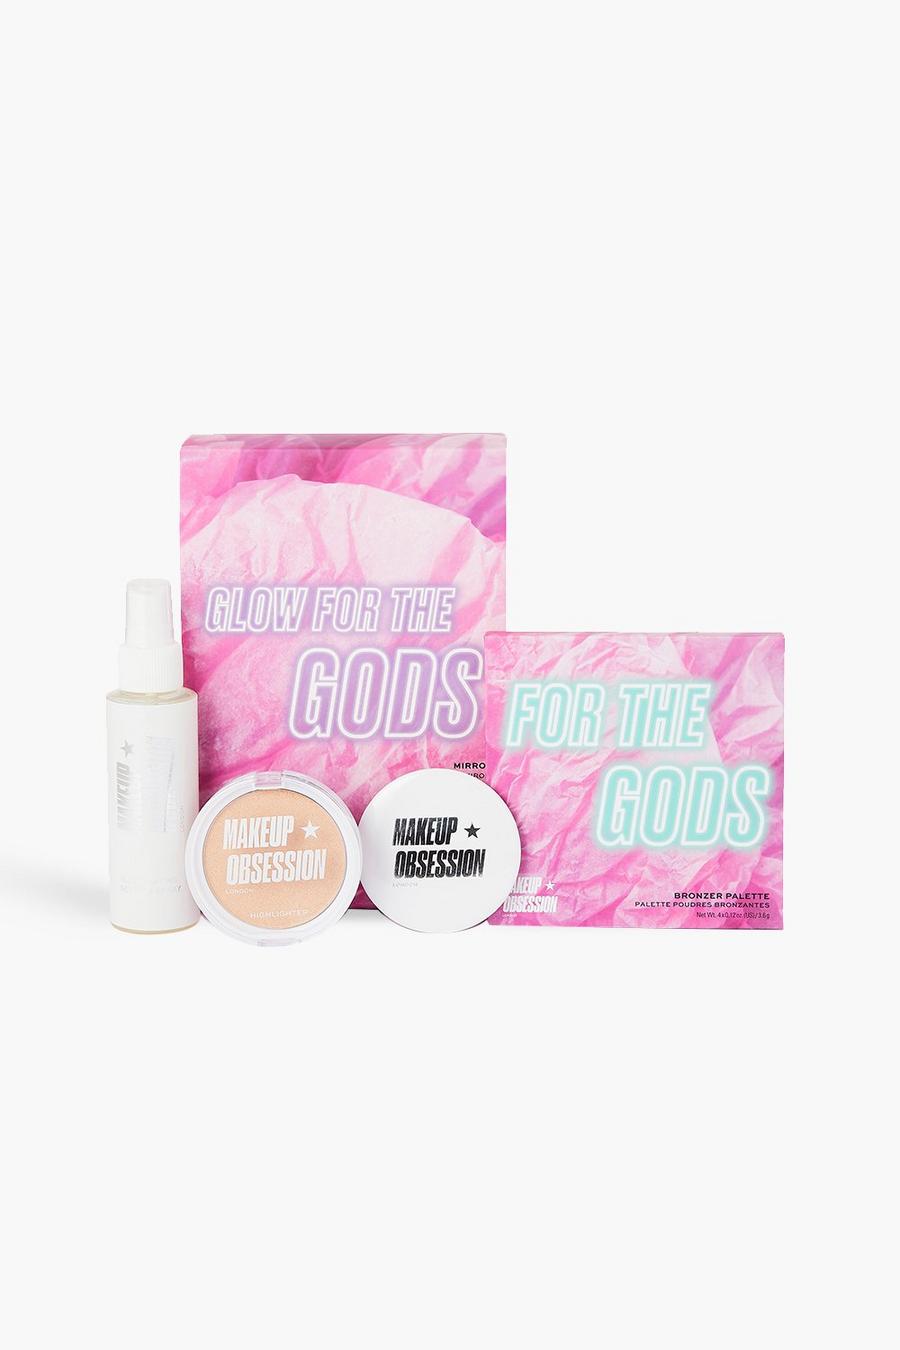 Makeup Obsession - Coffret Cadeau "Glow for the Gods", Multi image number 1